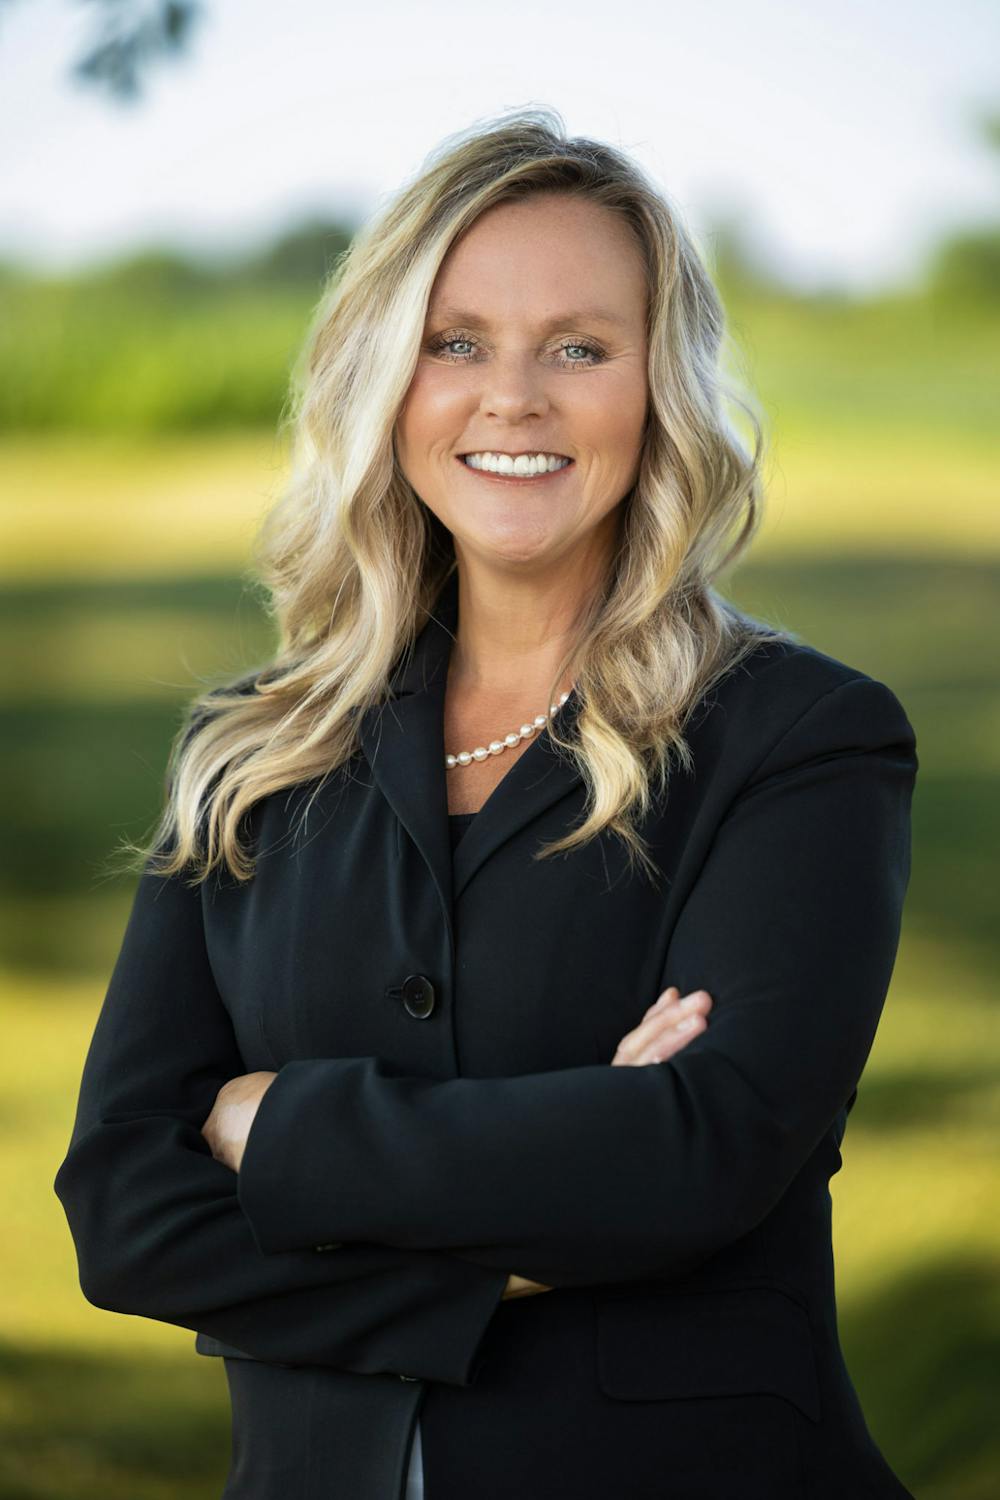 <p>Former Indiana Superintentendant and Ball State Alumna Jennifer McCormick poses for a headshot. <strong> </strong>McCormick announced she will be running for Indiana Governor, according to a press release on May 4. Photo Provided, McCormick for Governor Press Release</p>